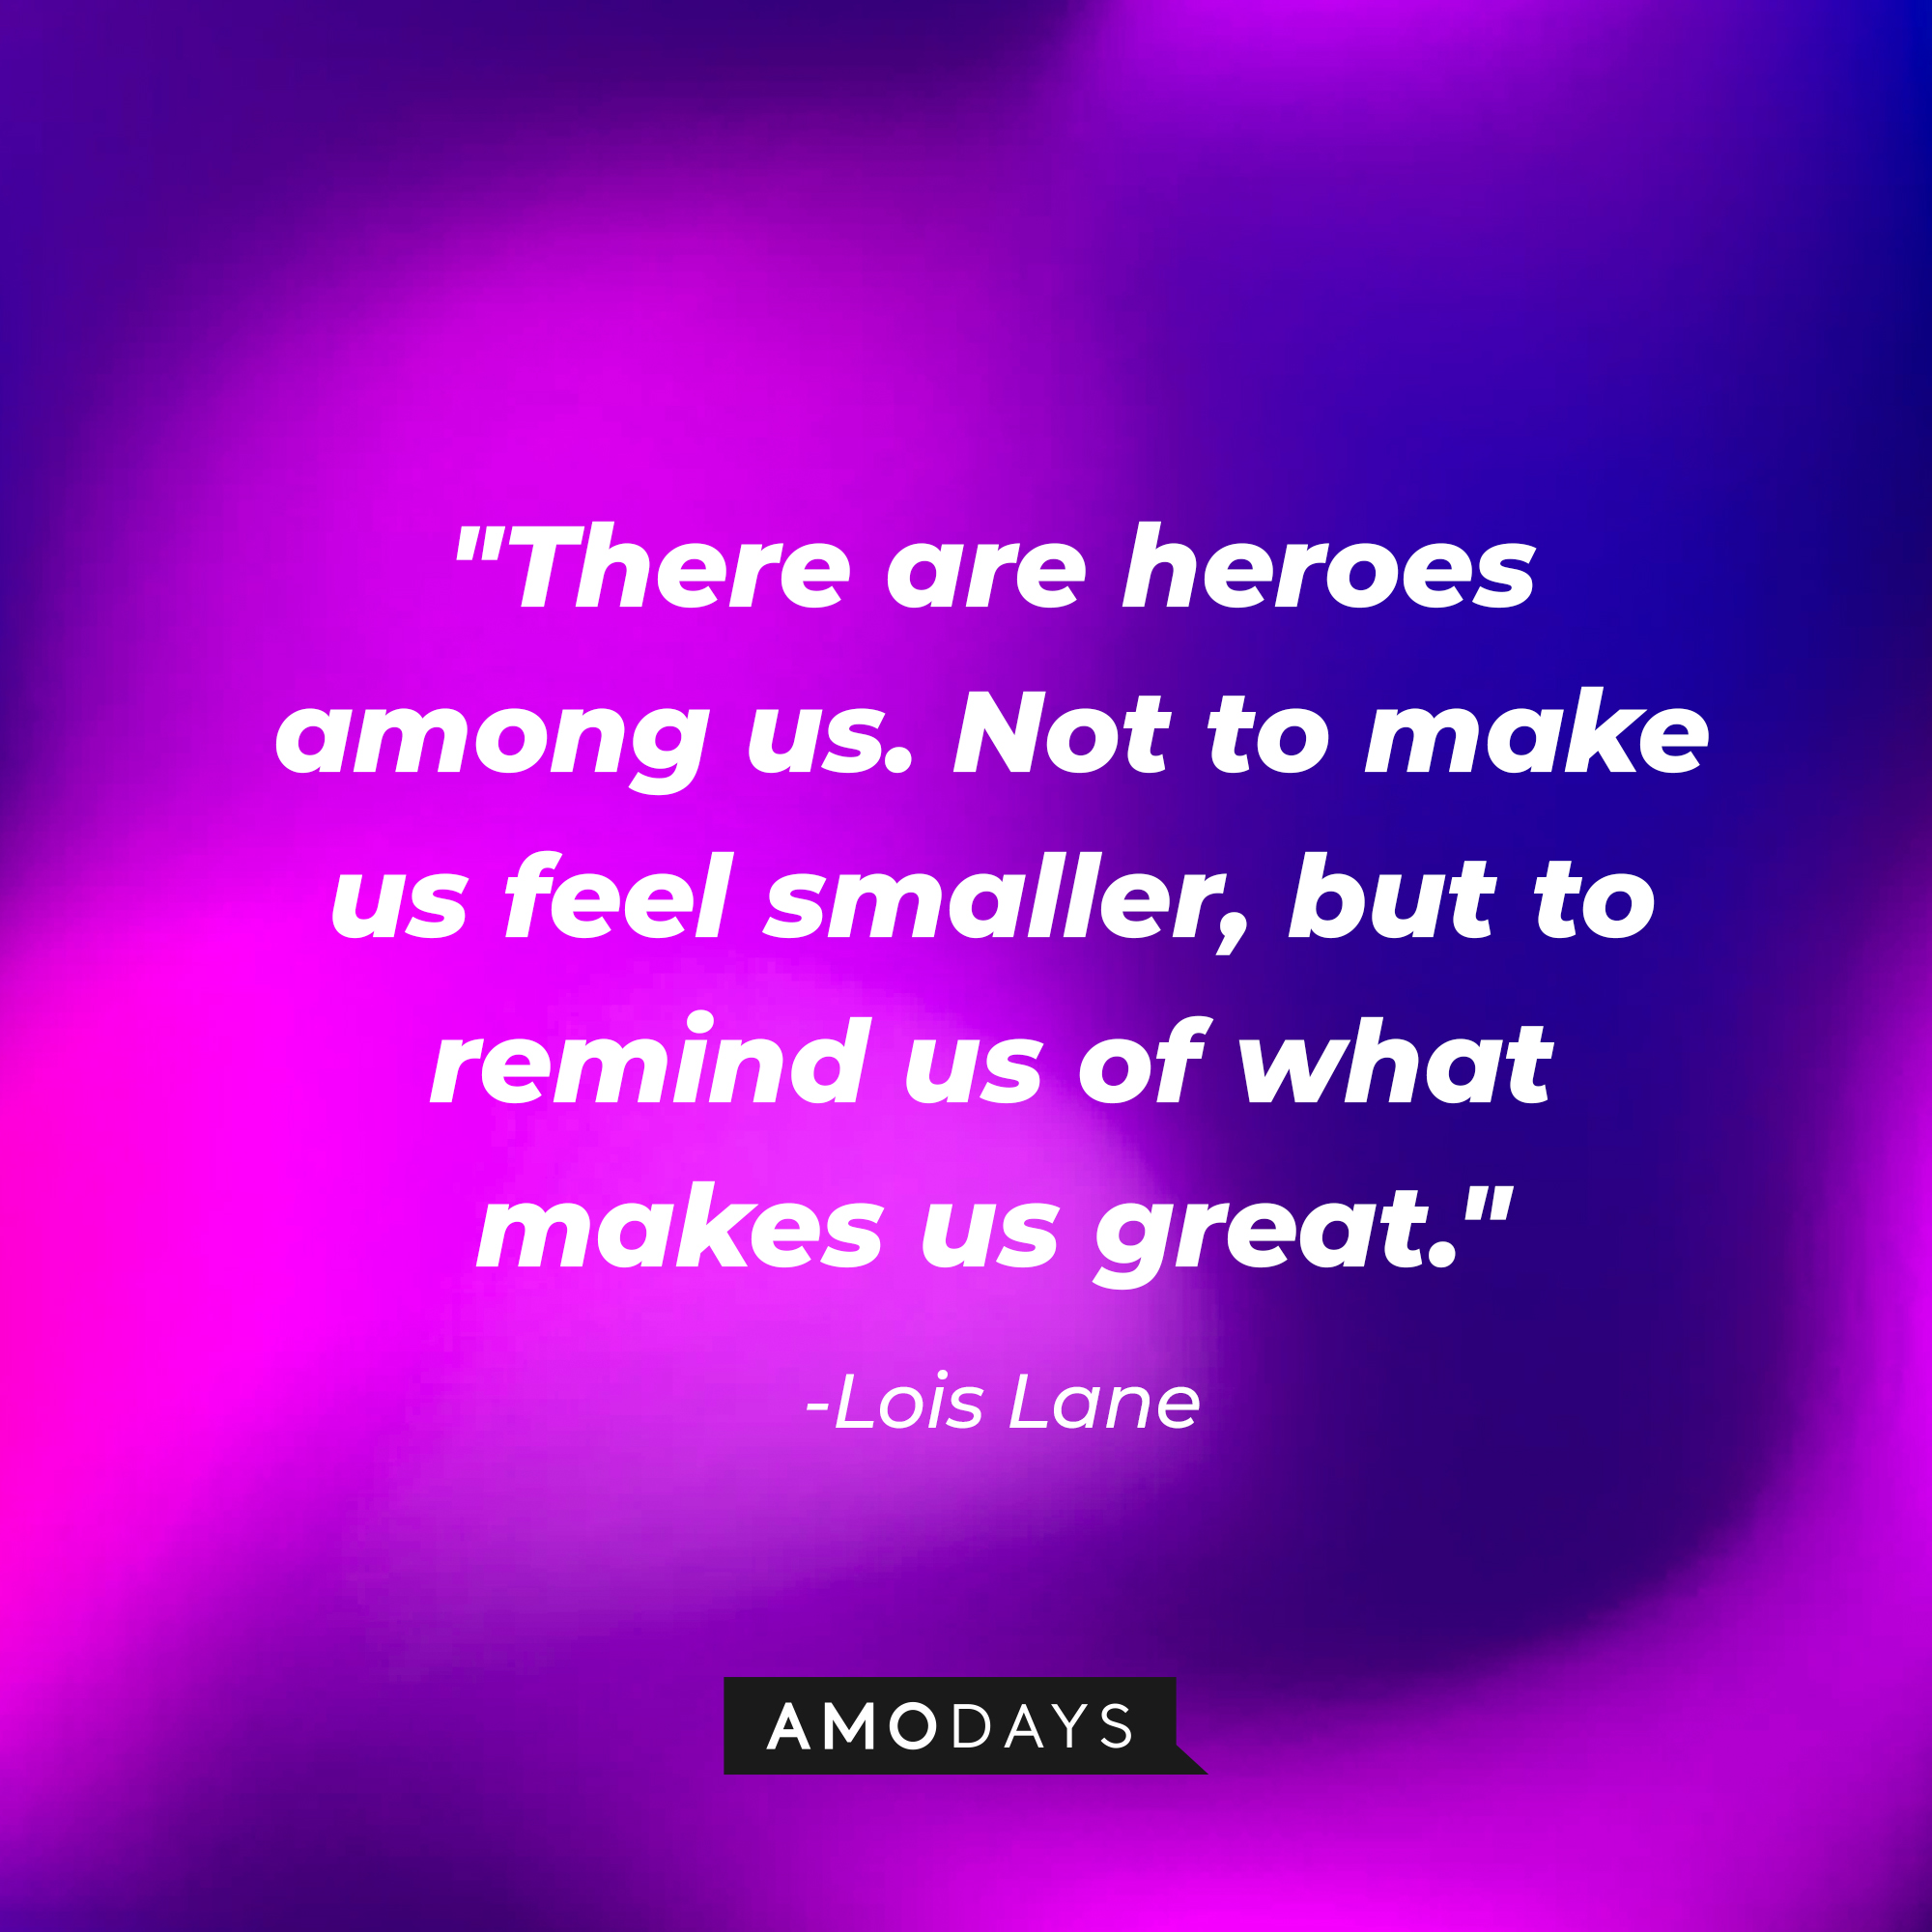 Lois Lane's quote, "There are heroes among us. Not to make us feel smaller, but to remind us of what makes us great." | Source: AmoDays